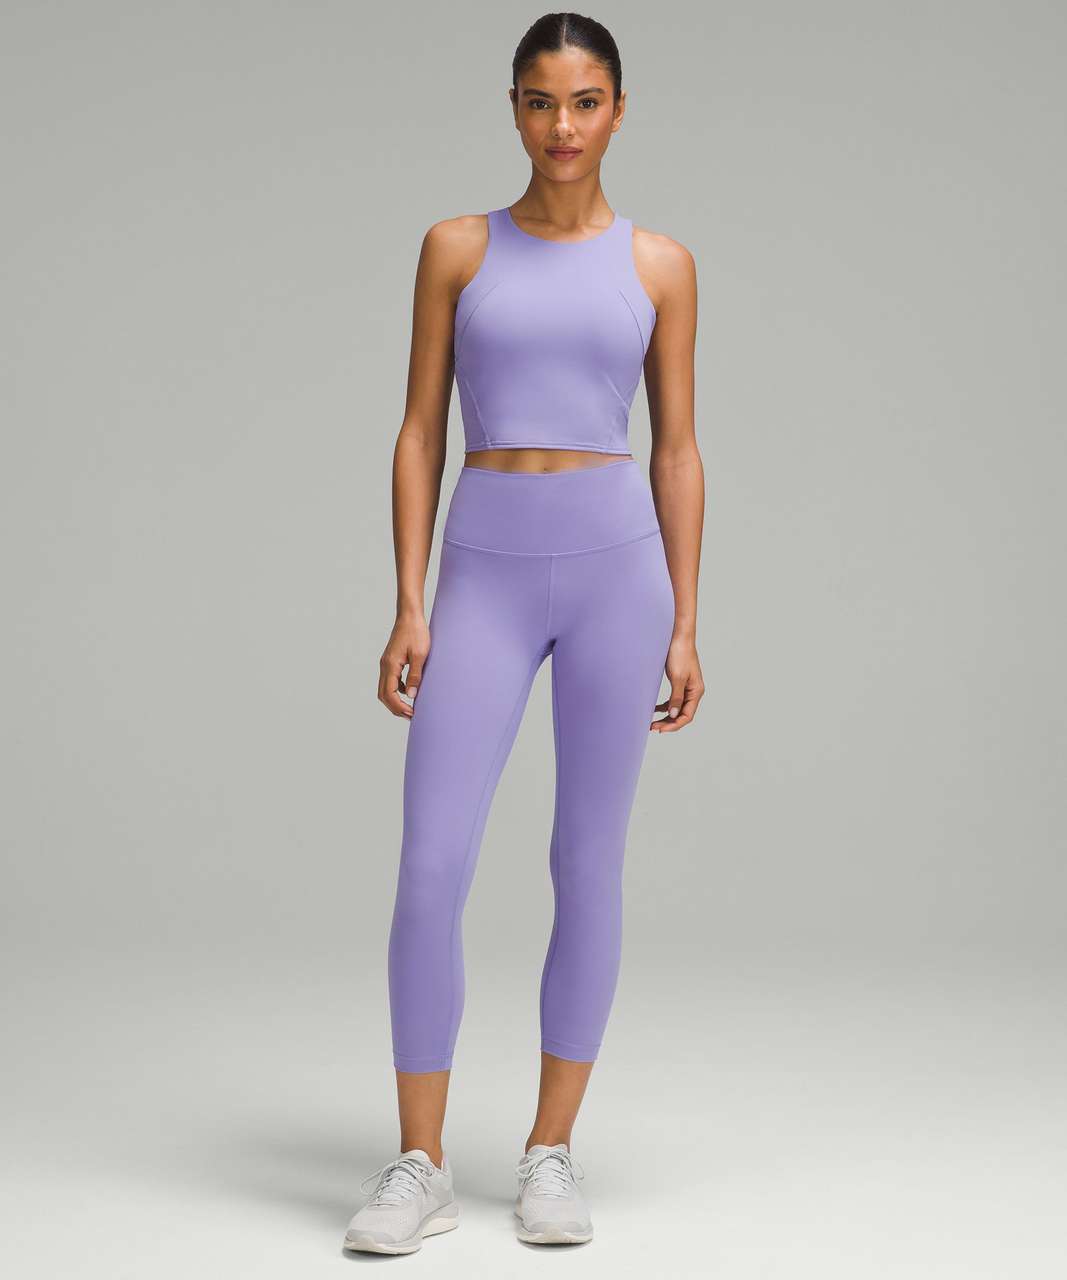 Align tank in lavender dew (8) and chambray wunder trains (4)!! Similar  combination to rhino grey I posted a week ago. Still finding new ways to  match lavender dew : r/lululemon